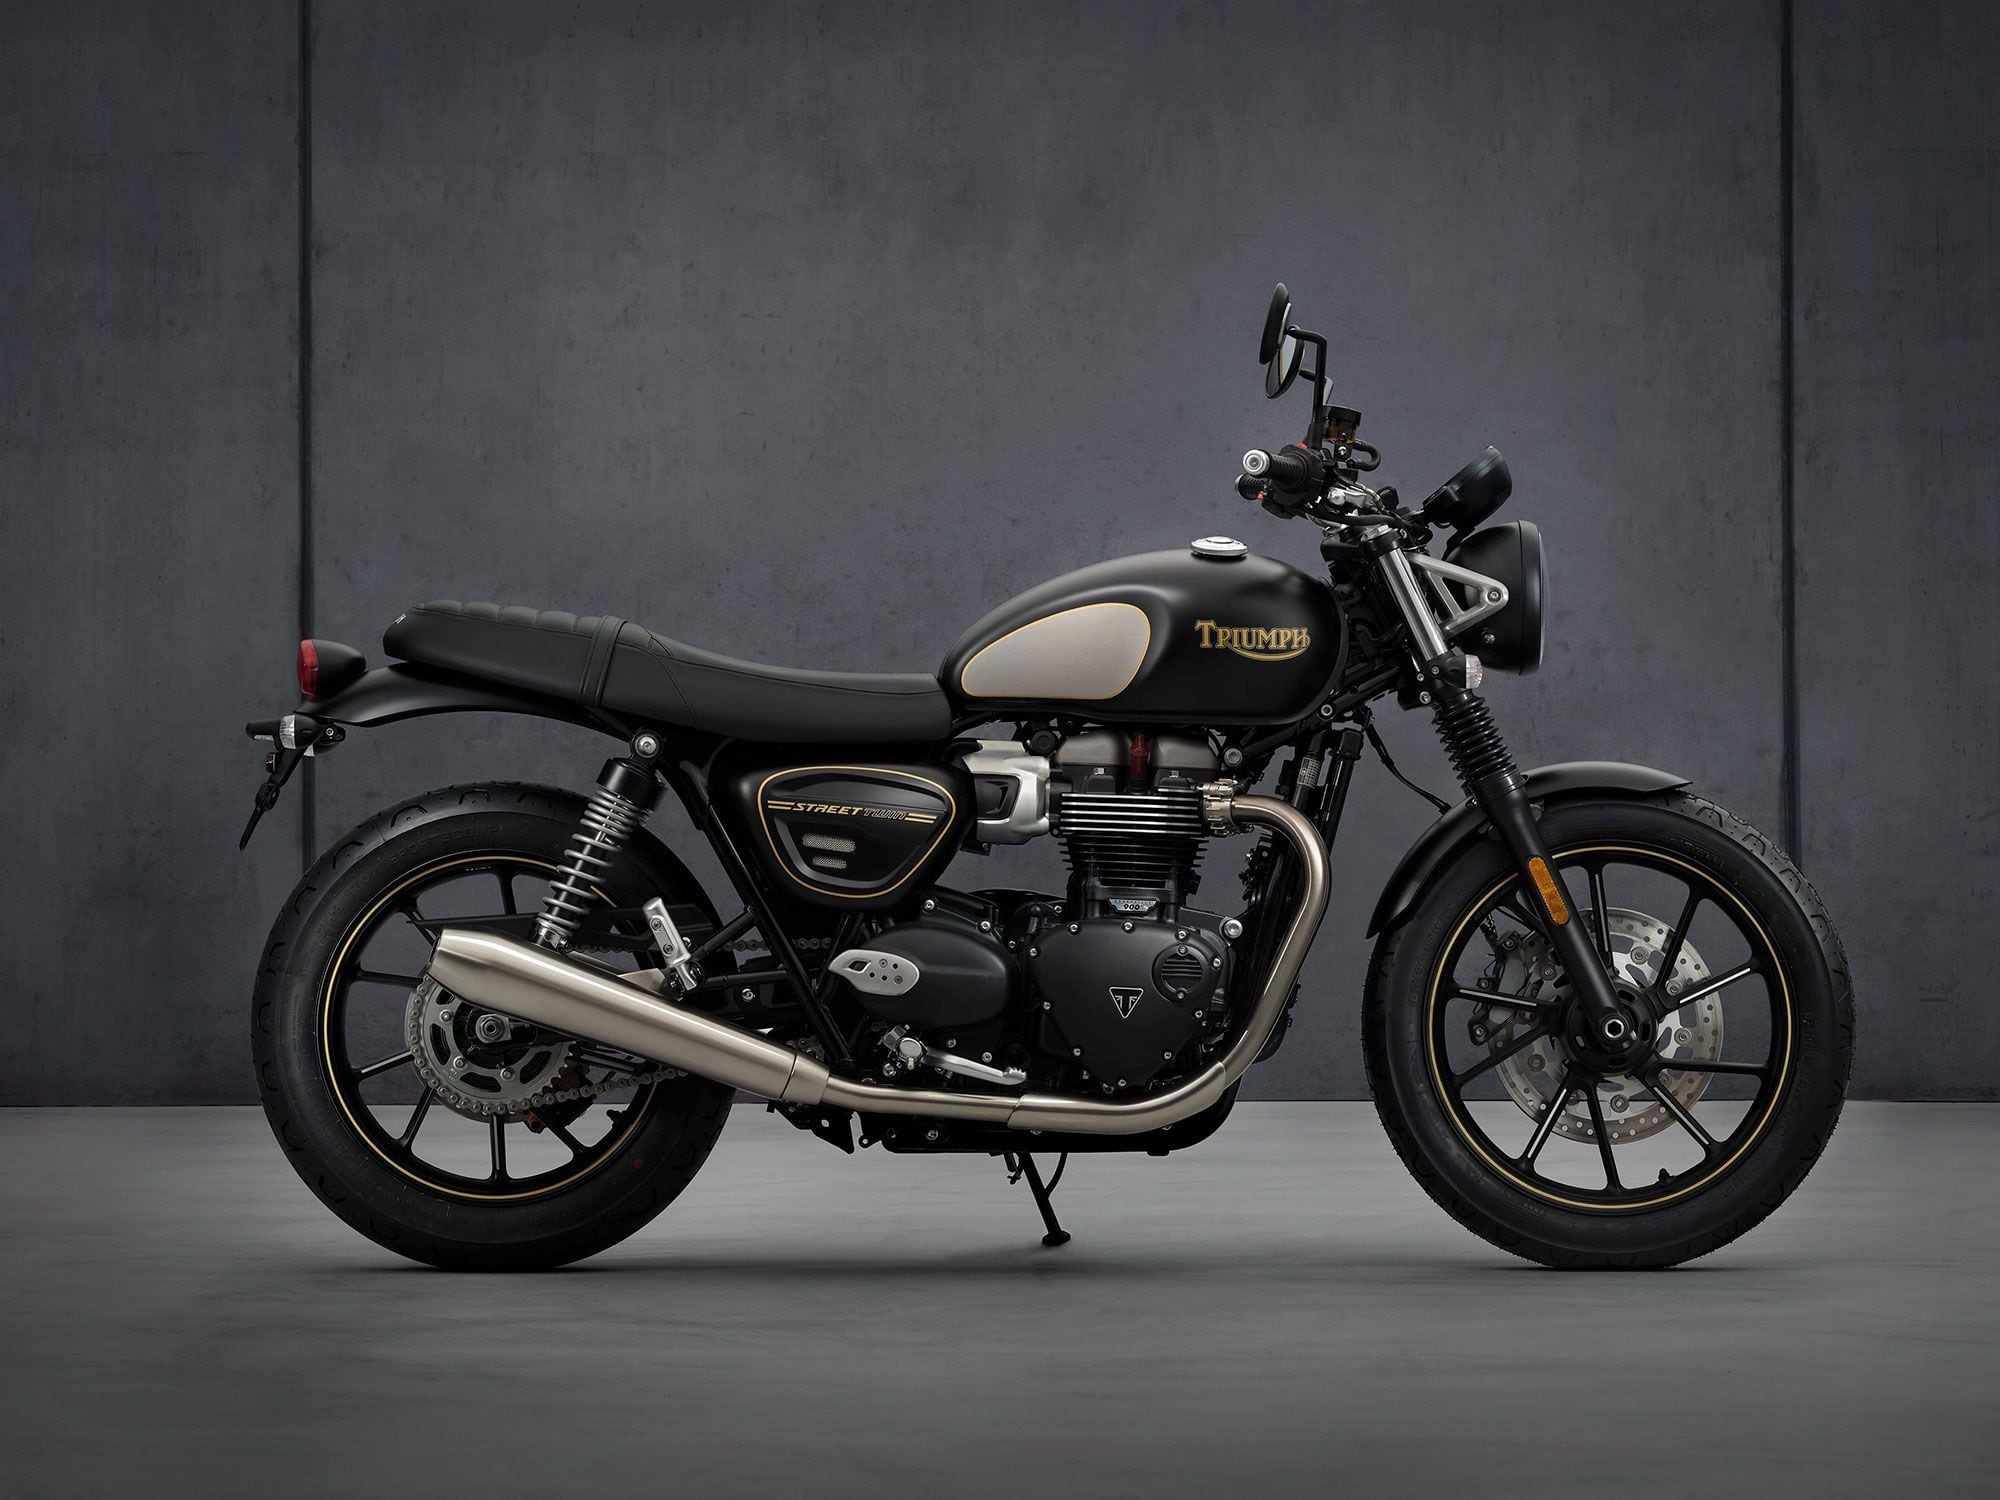 The limited-edition Street Twin Gold Line Twin boasts a hand-painted black and gold color scheme. Only 1,000 are available.